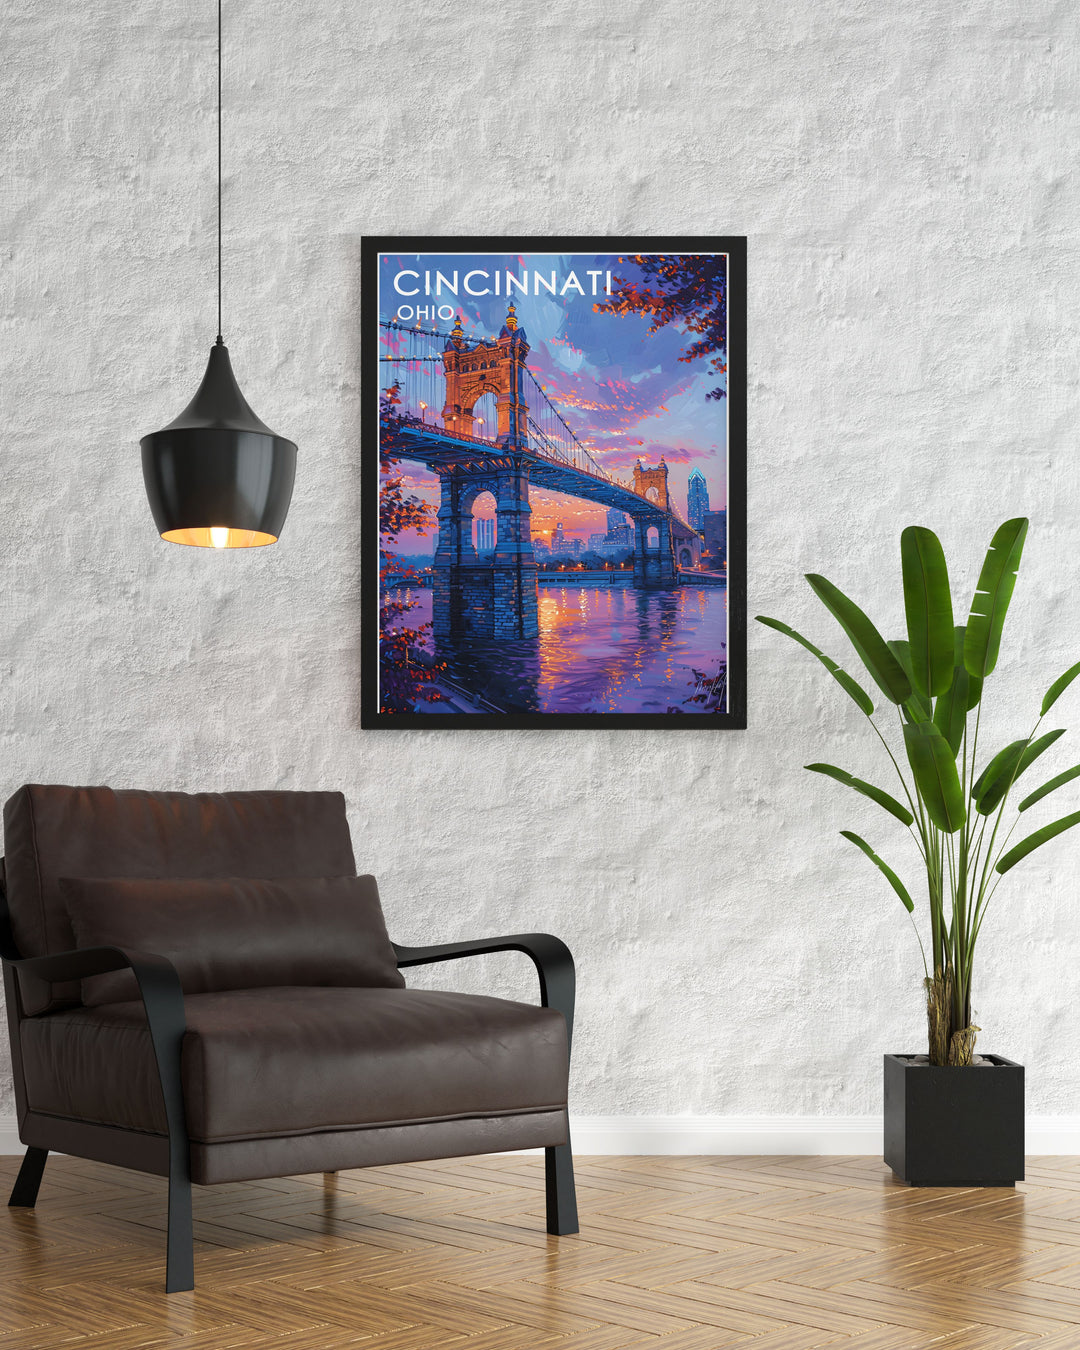 A detailed art print of the Roebling Suspension Bridge highlights its intricate design and historical importance. Perfect for any space, this poster celebrates the engineering marvel and architectural heritage of Cincinnati.